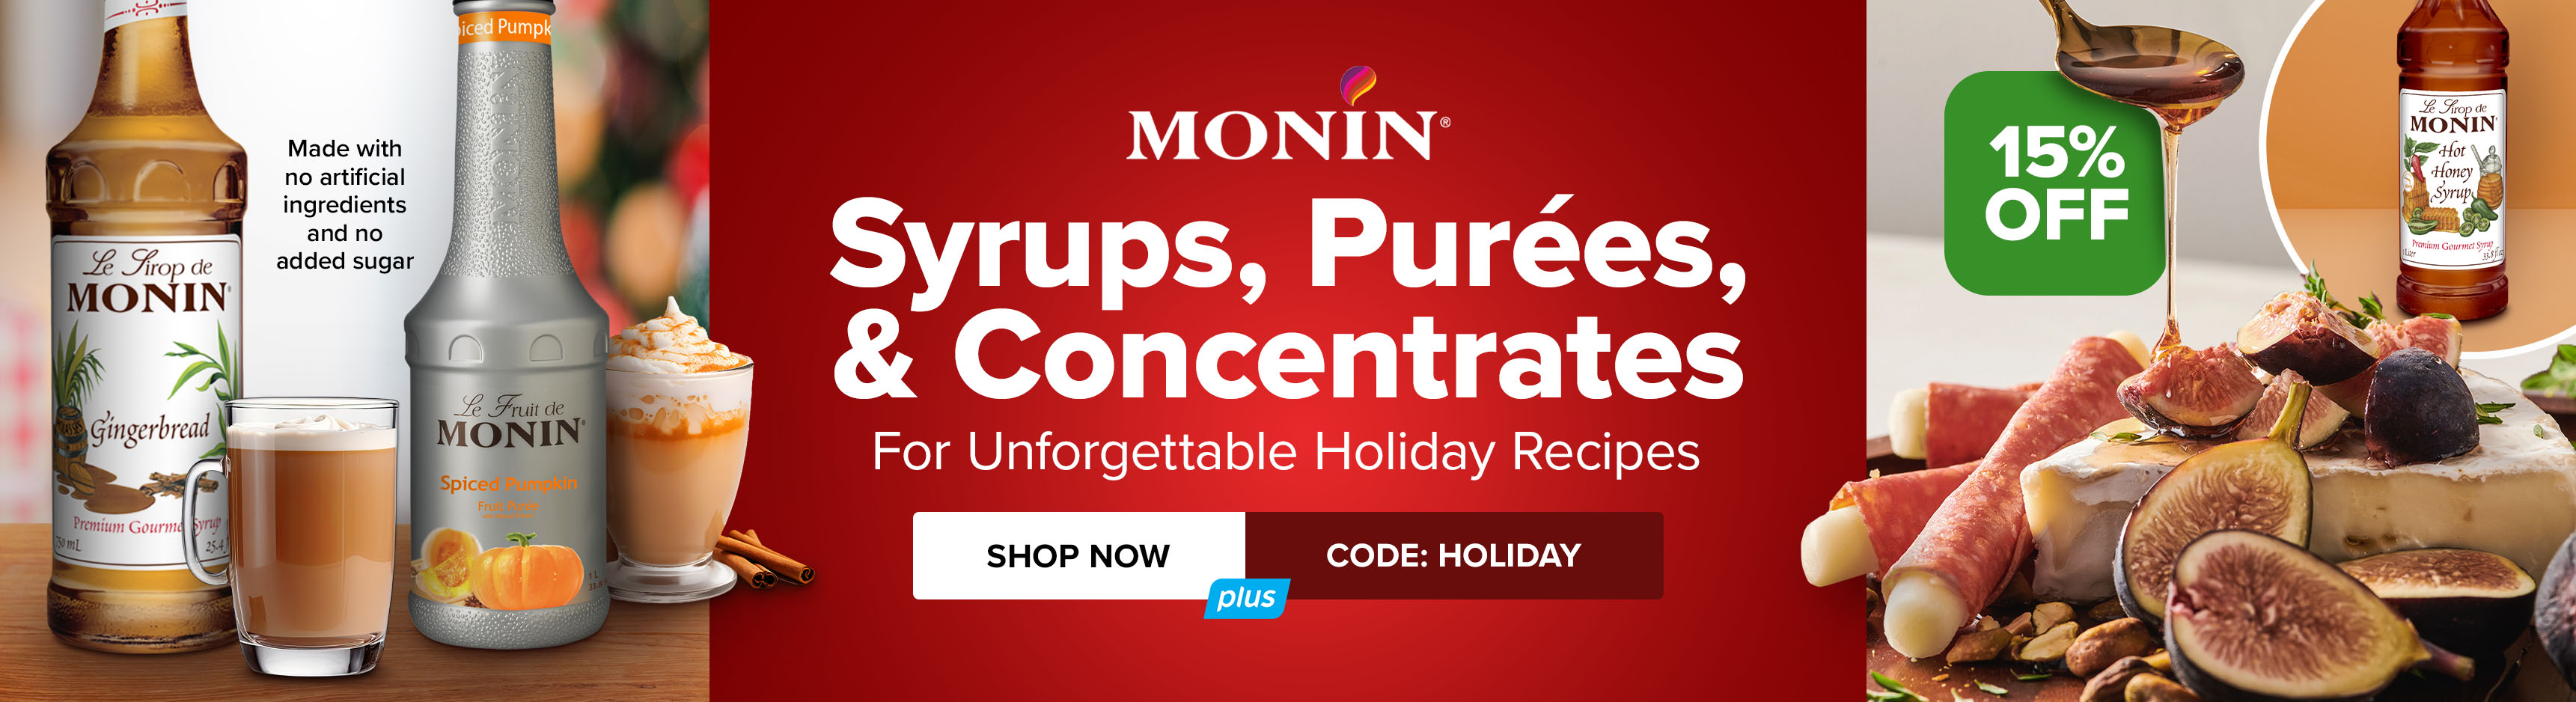 15% off Monin Syrups, Purees, & Concentrates